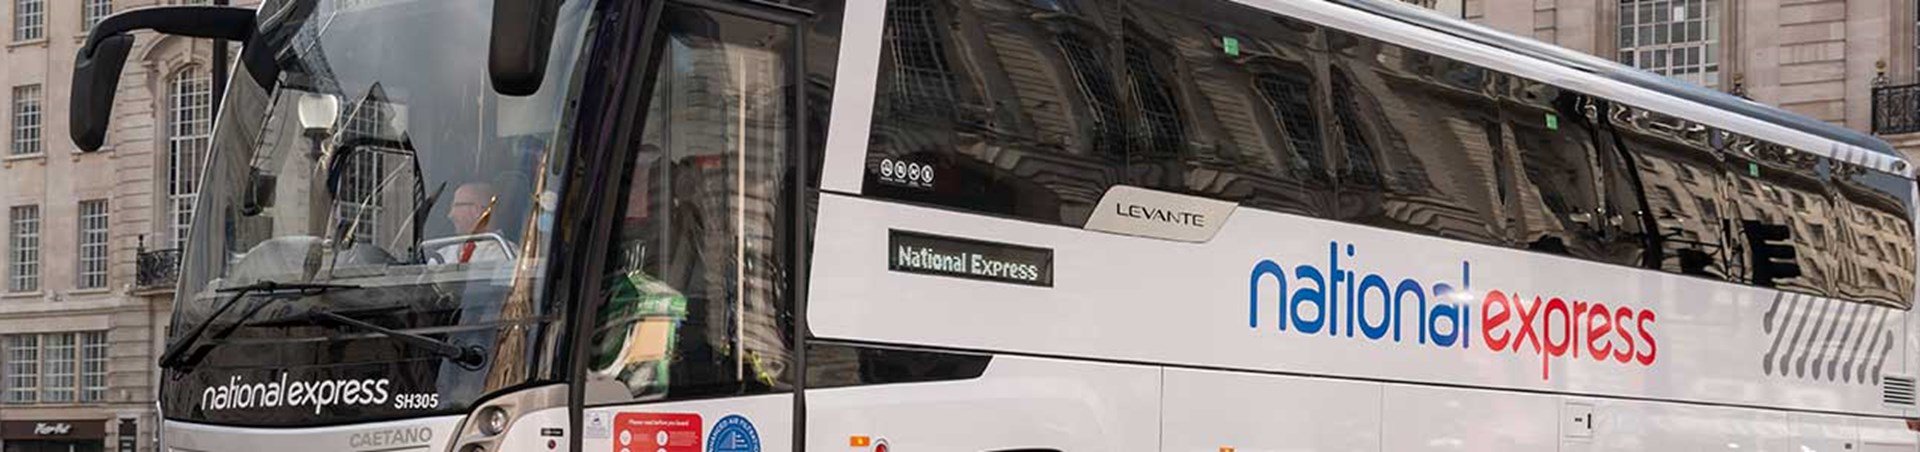 Travel by coach with National Express